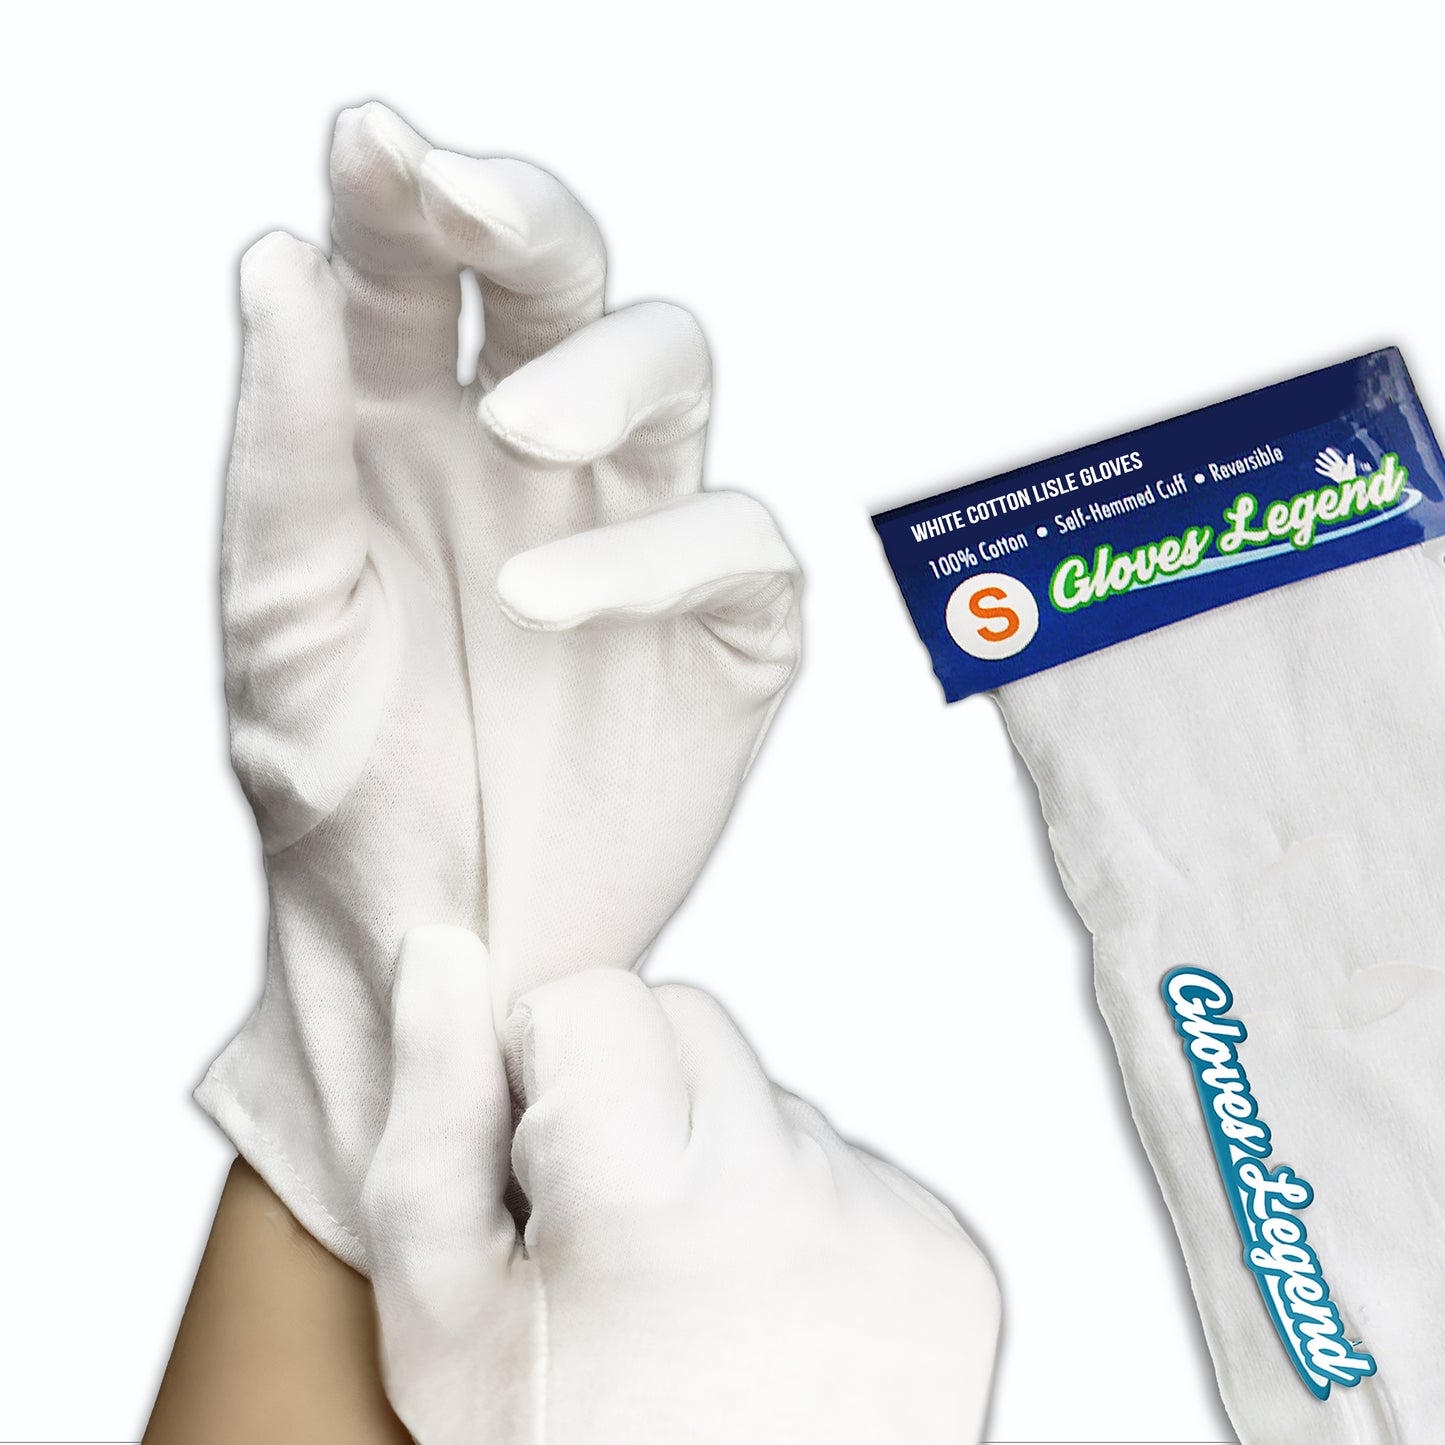 60 Pairs (120 Gloves) - Gloves Legend White Cotton Moisturizing Parade Jewelry Silver Costumes Inspection Gloves - Size S~XL